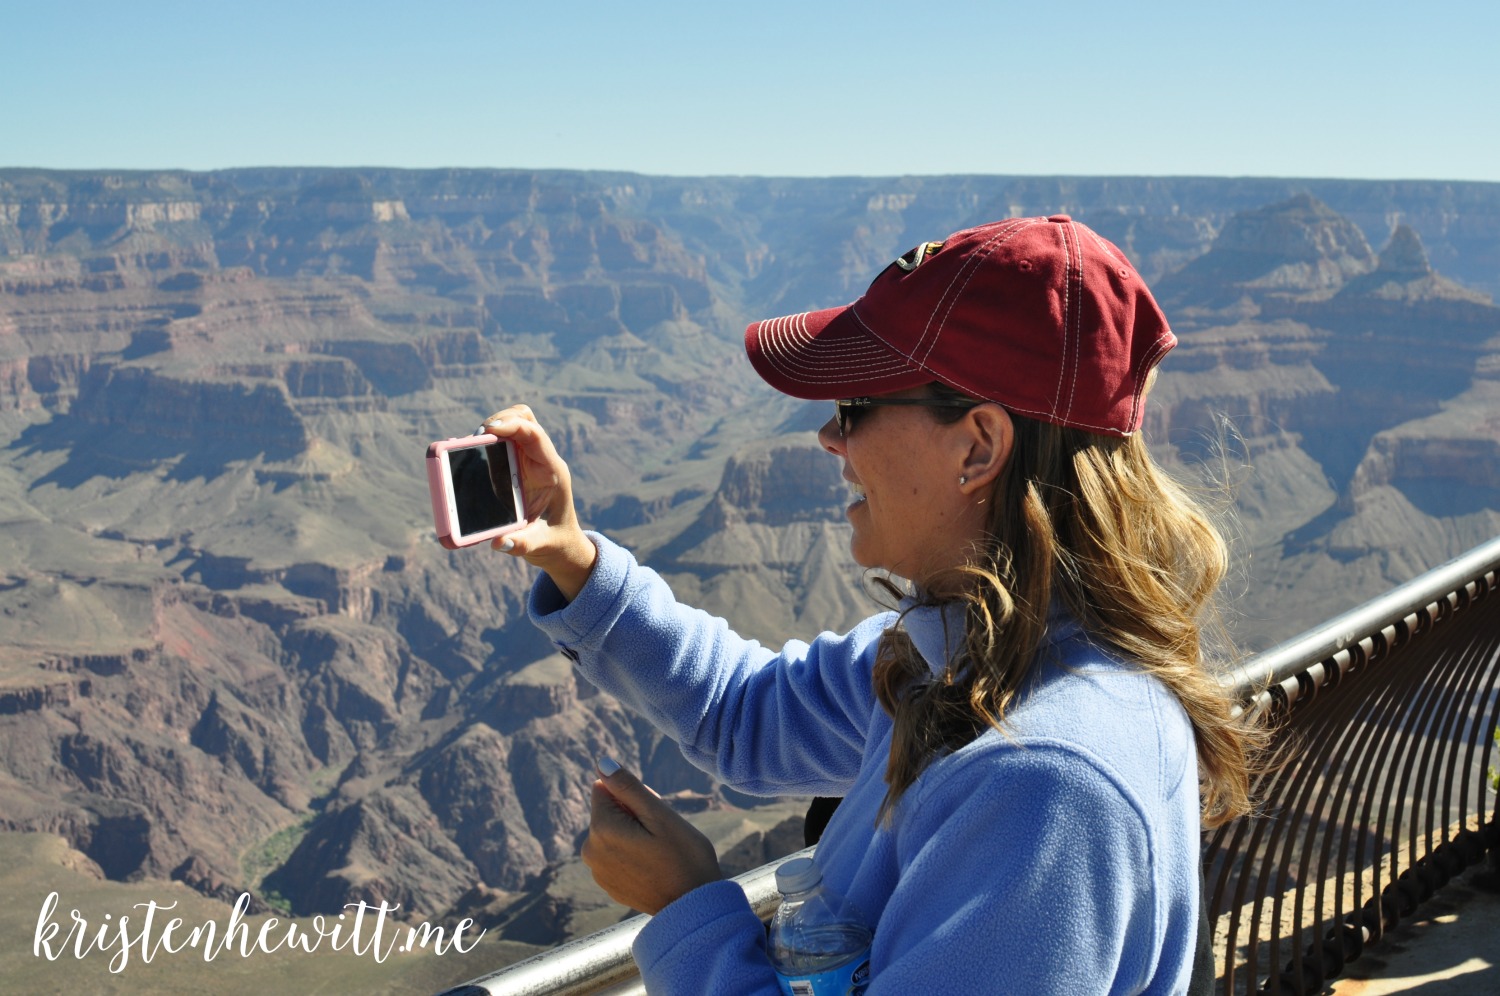 Are you heading west to Arizona with your kids? Before you go read this first, and make the most of your time in the Grand Canyon State!